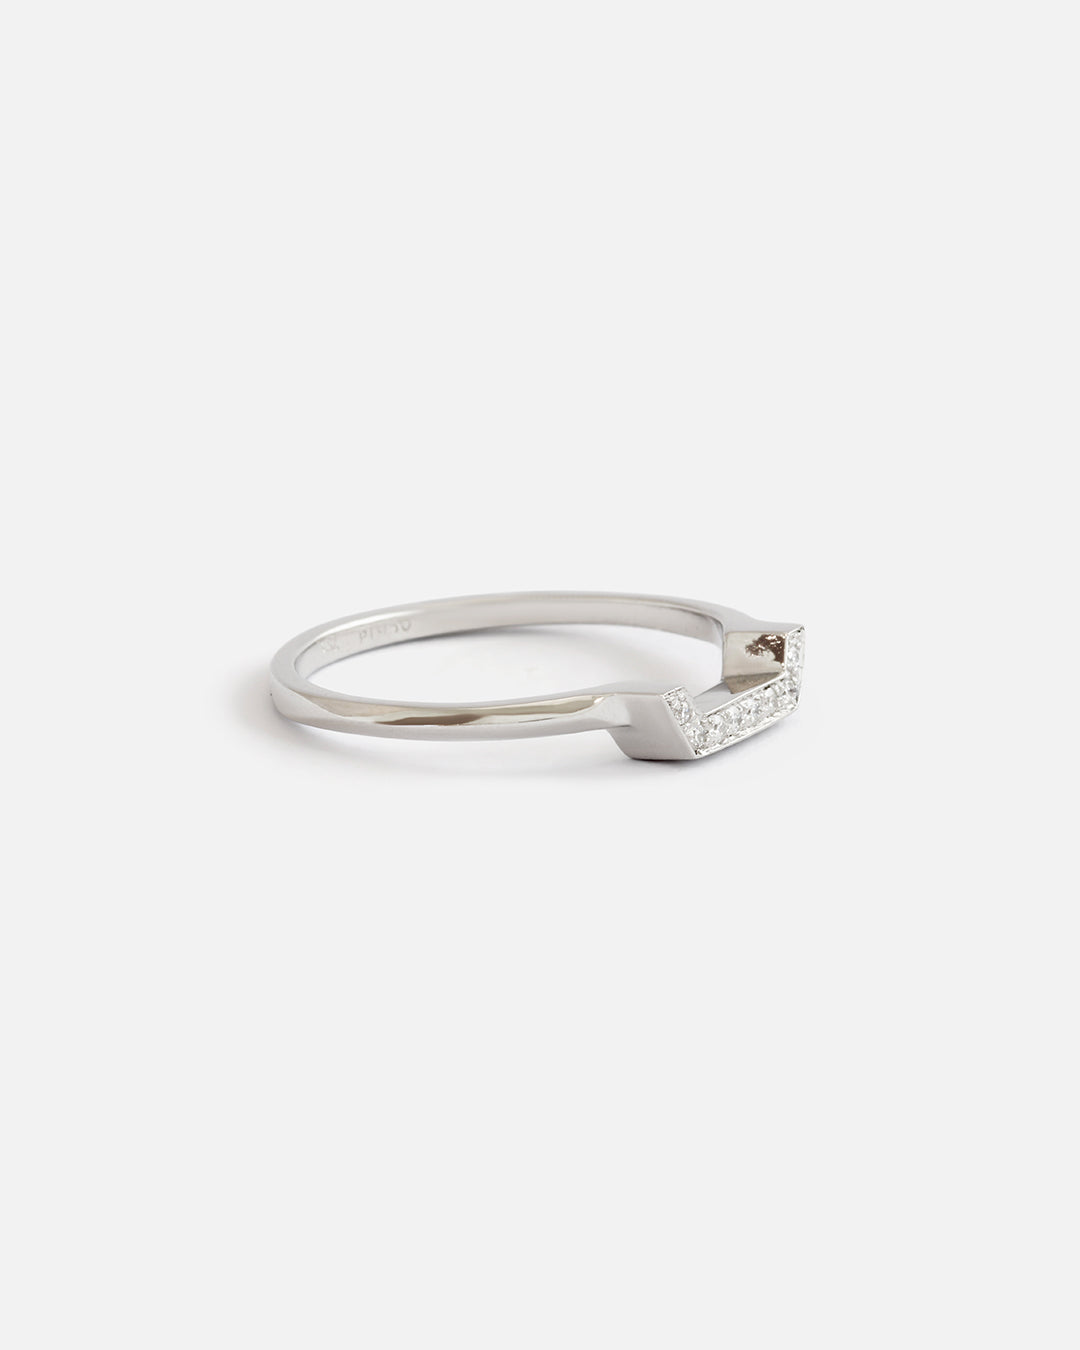 Pave Setting / Bottom Stackable Ring By Hiroyo in Wedding Bands Category